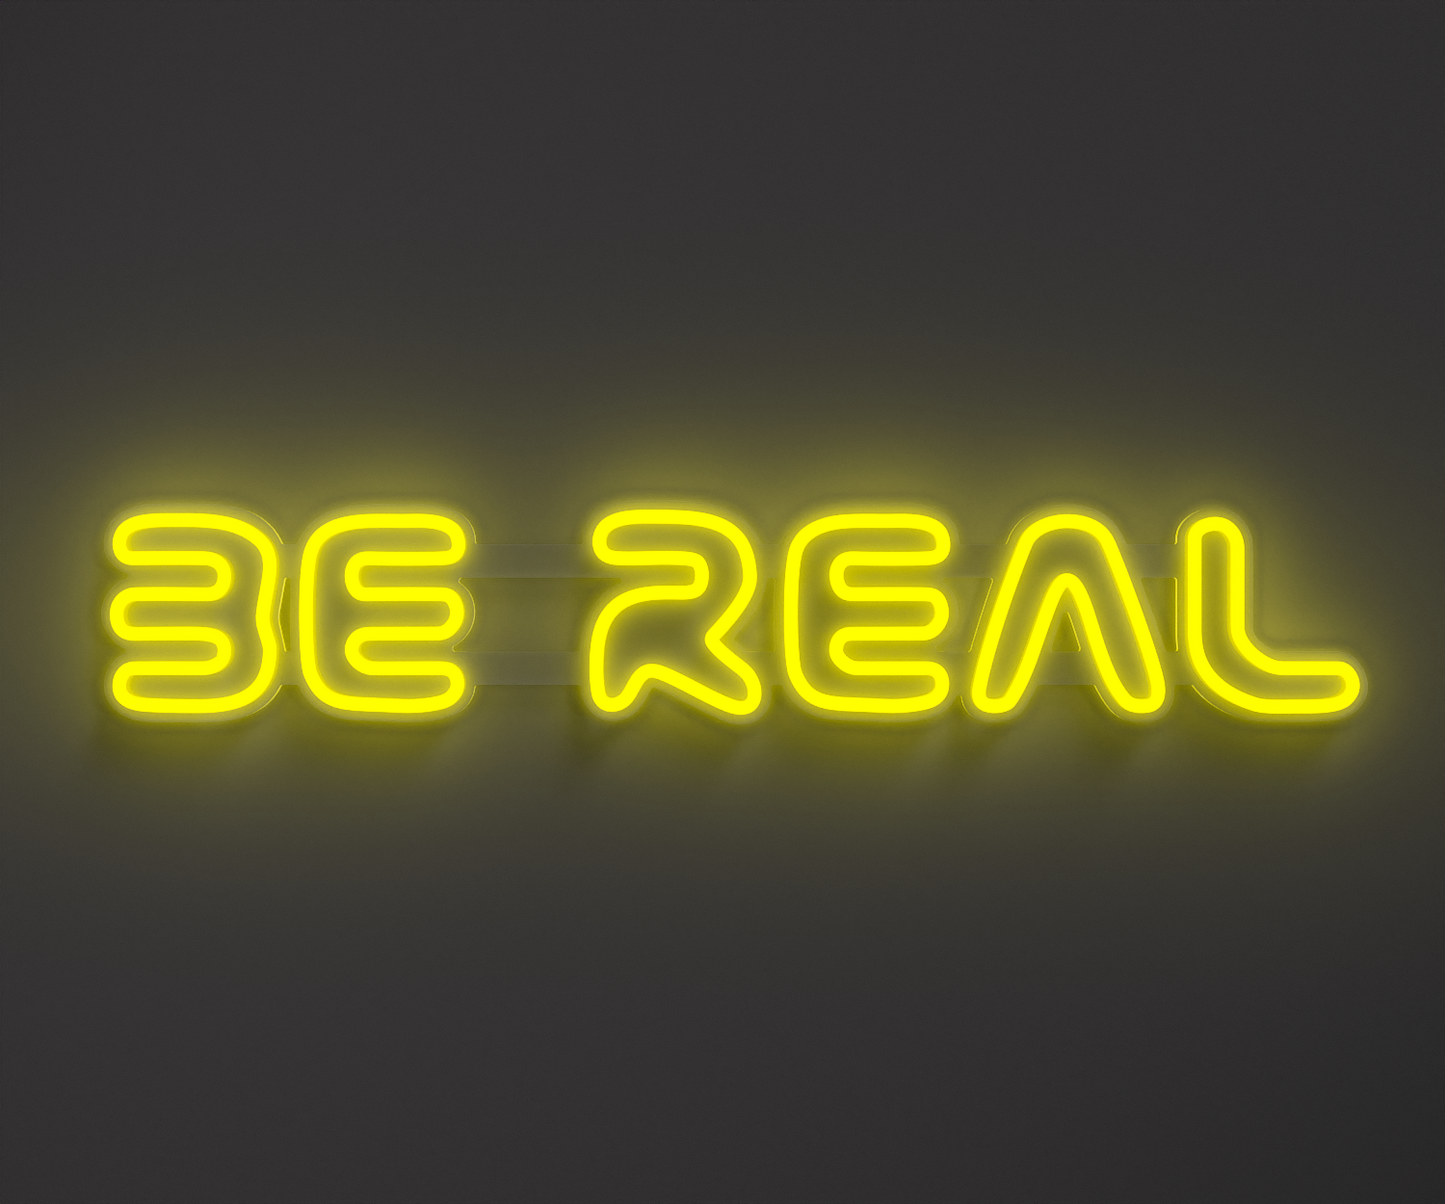 bright yellow neon sign that says be real